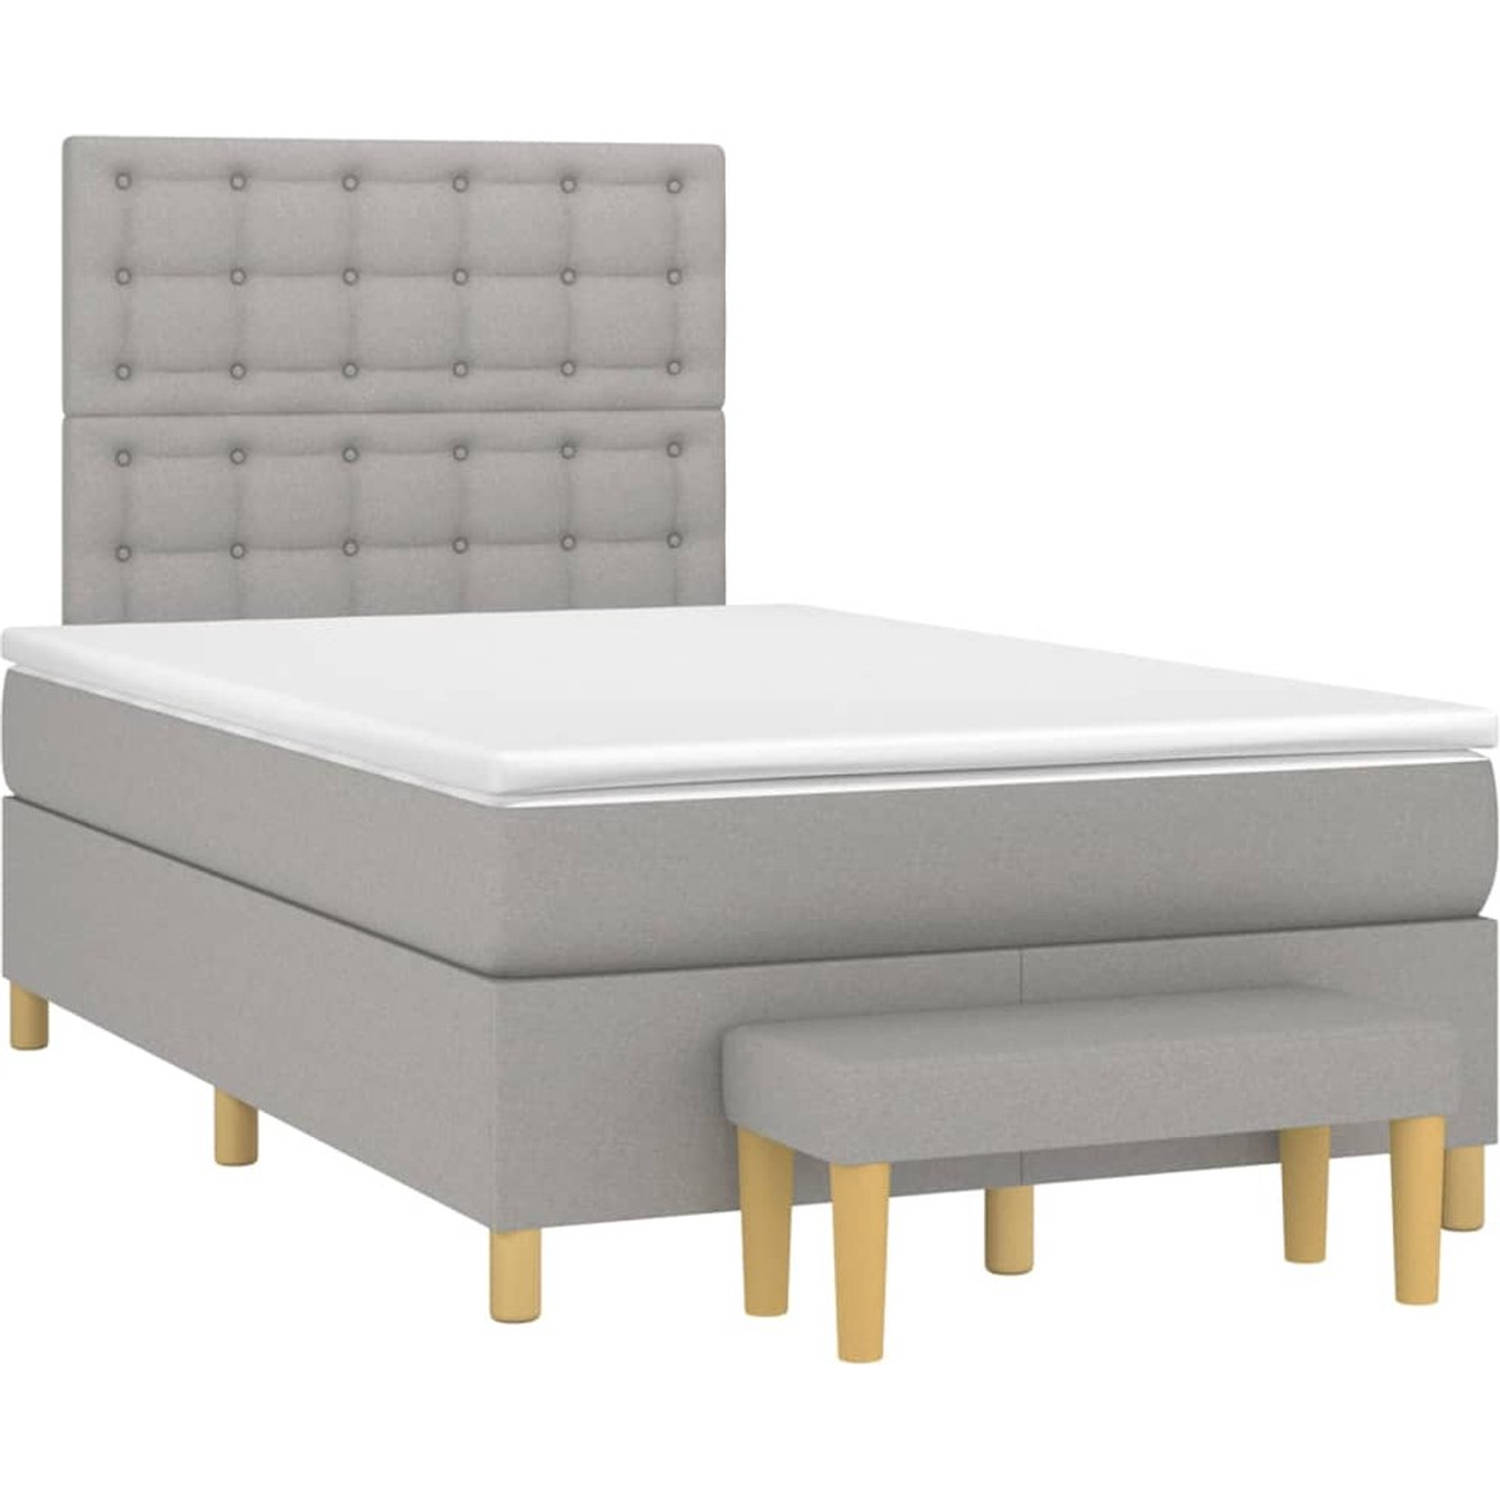 The Living Store Boxspringbed - Rustgevend - Bed - Afmeting- 203 x 120 x 118/128 cm - Ken- Duurzaam materiaal